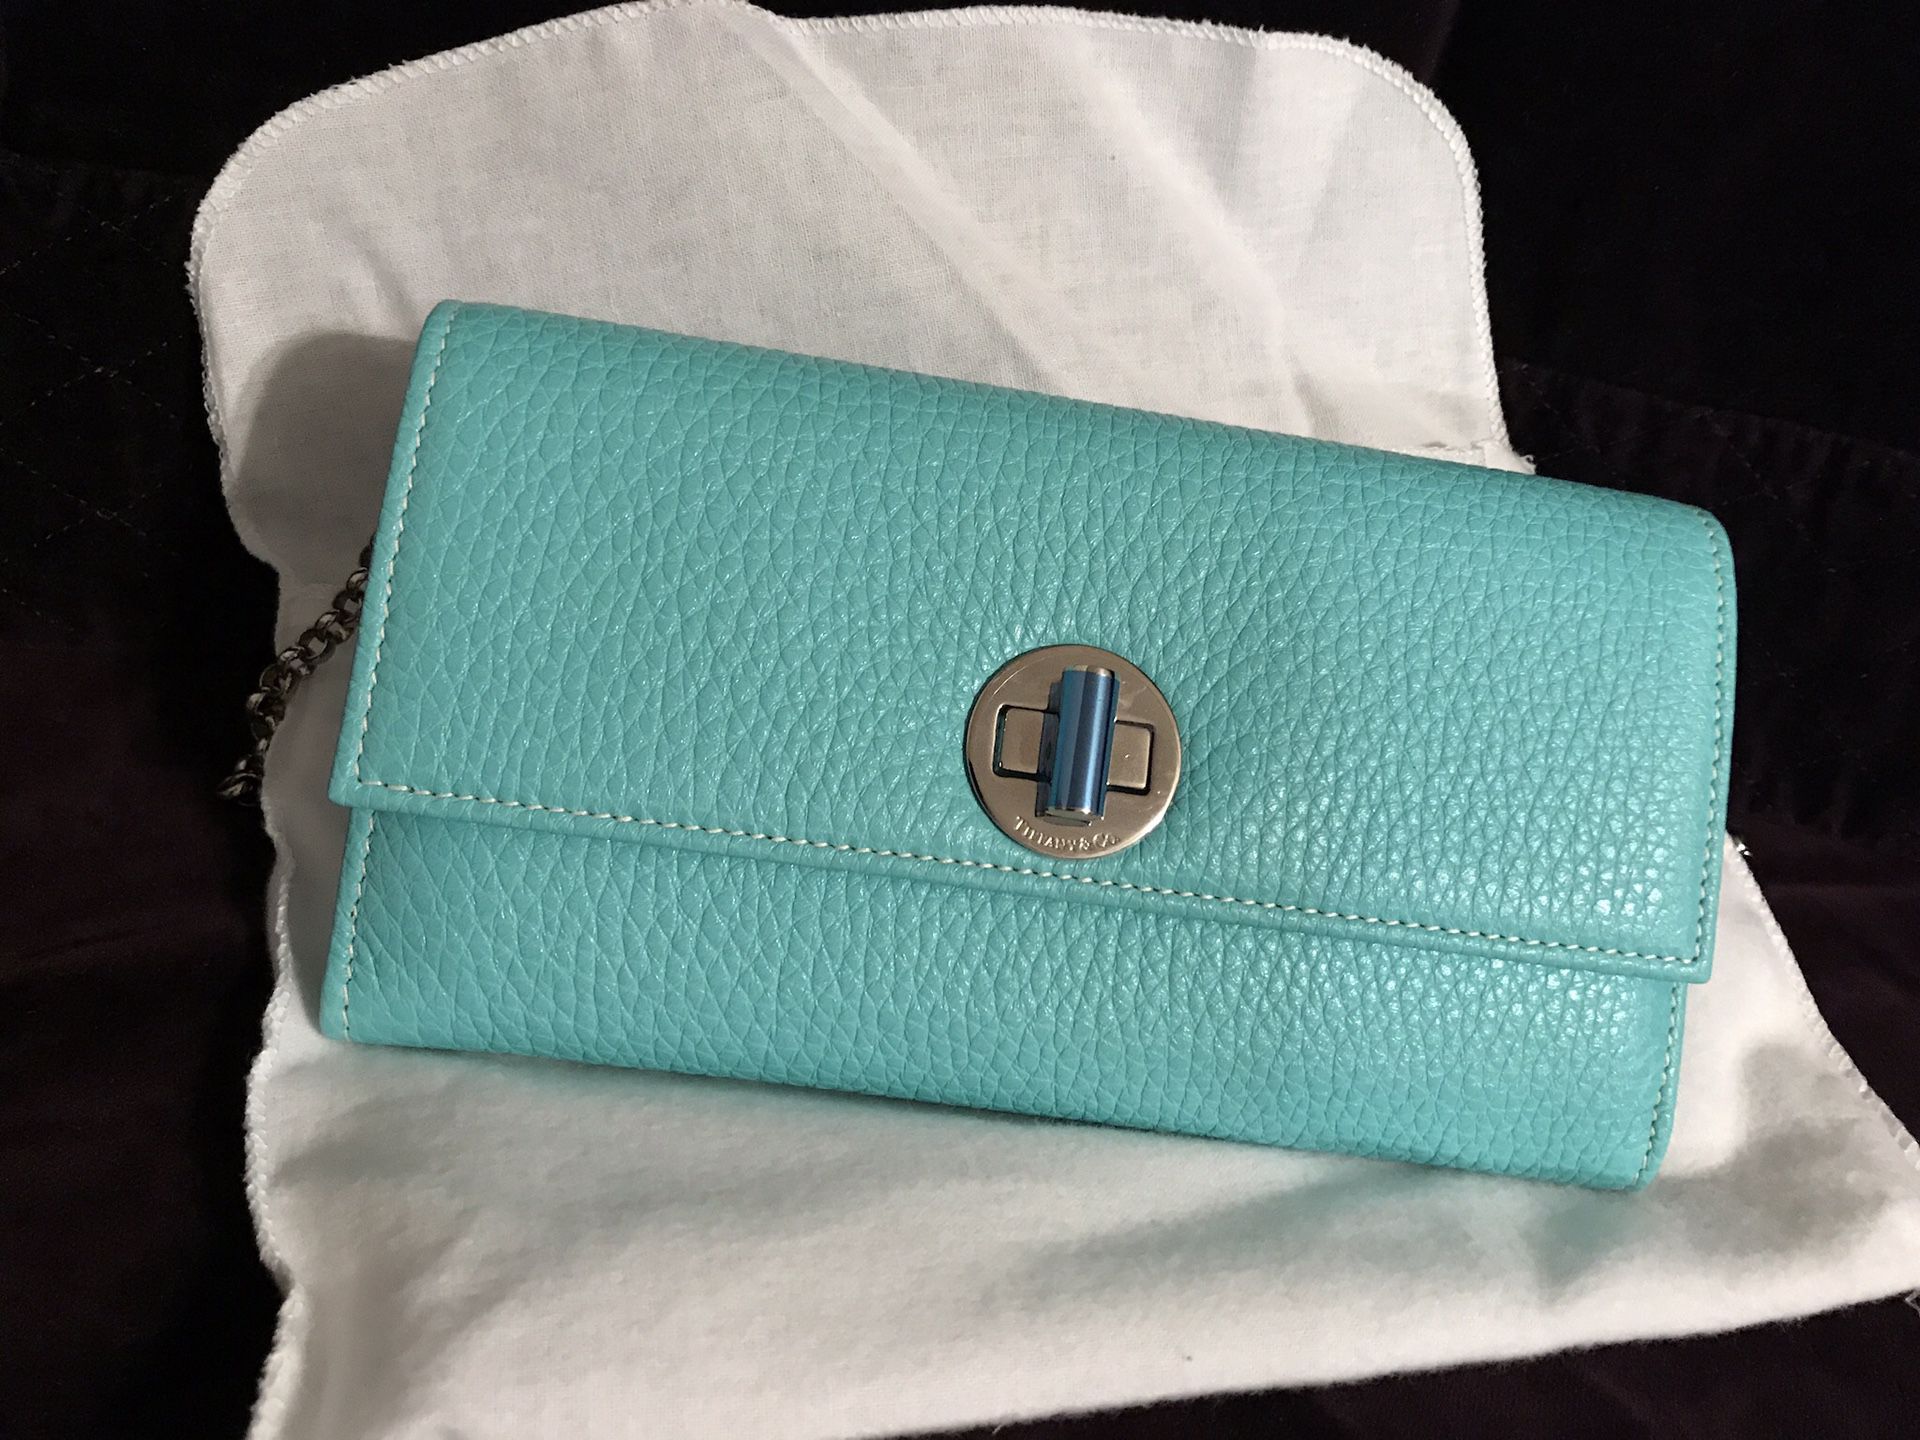 *NEW* Tiffany City Clutch With Removable Silver Chain Strap